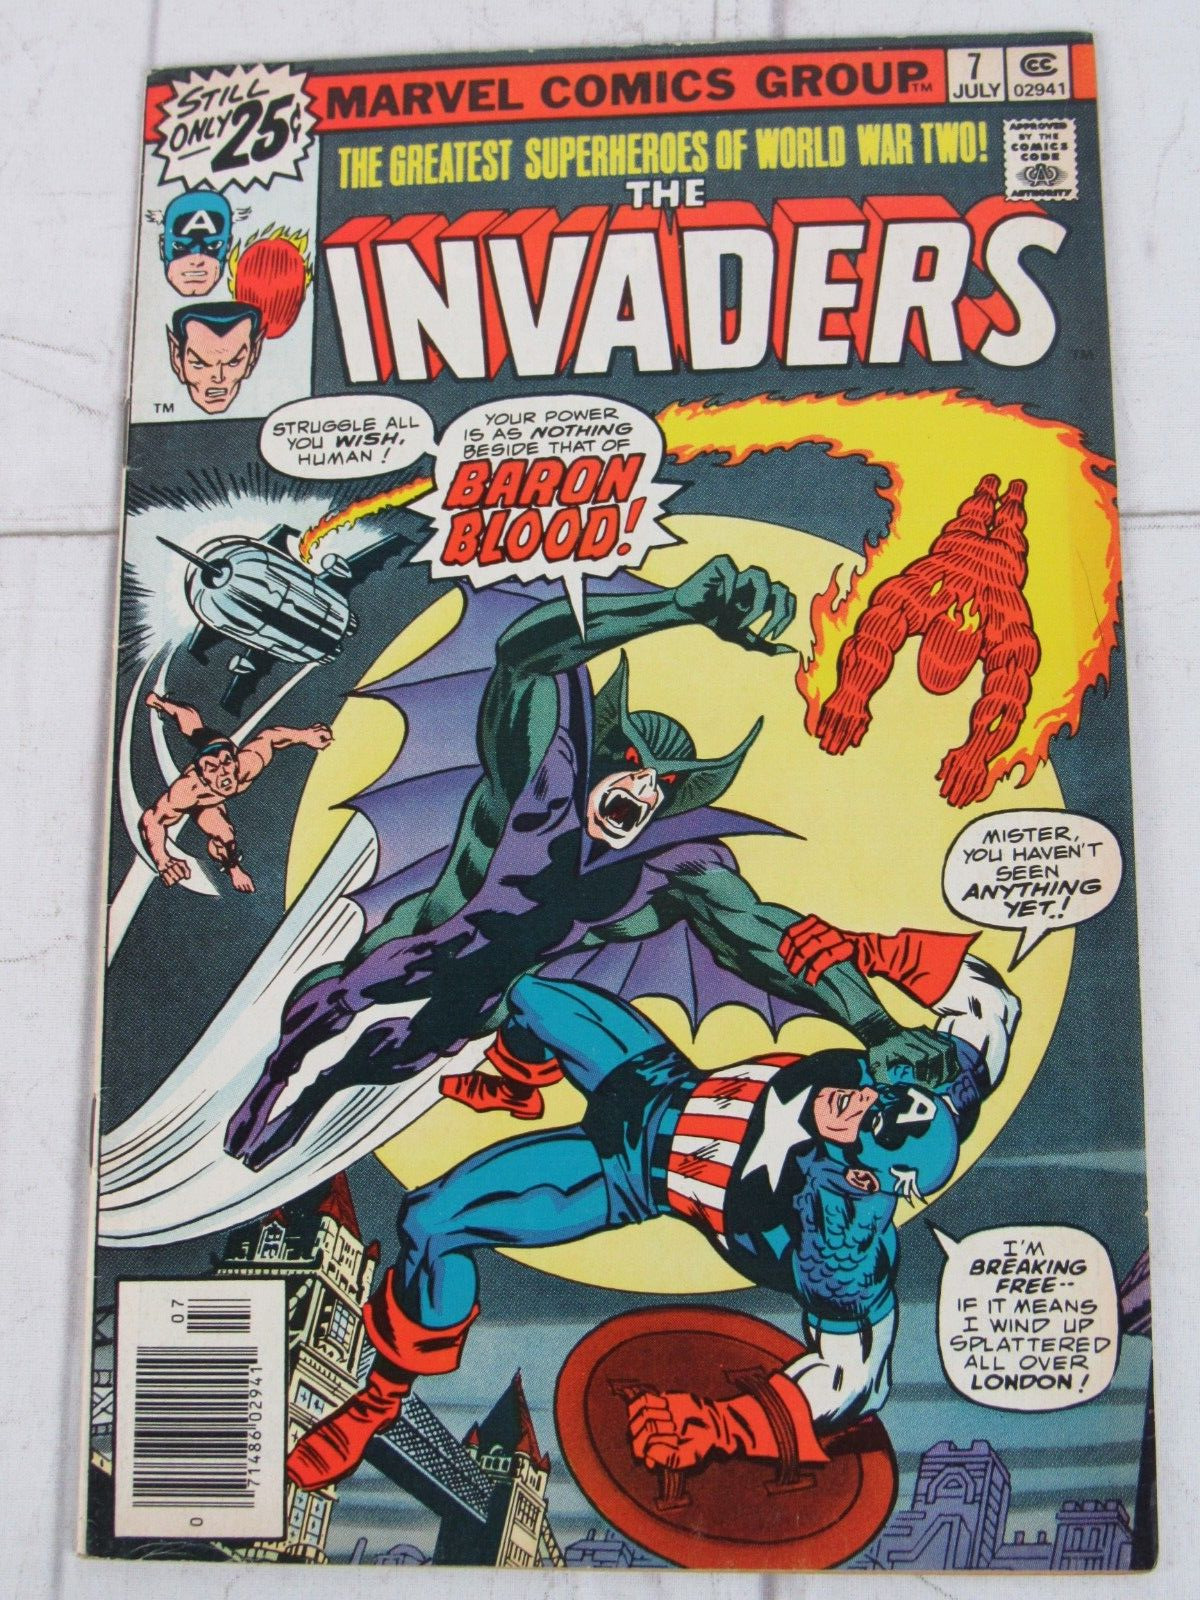 The Invaders #7 July 1976 Marvel Comics